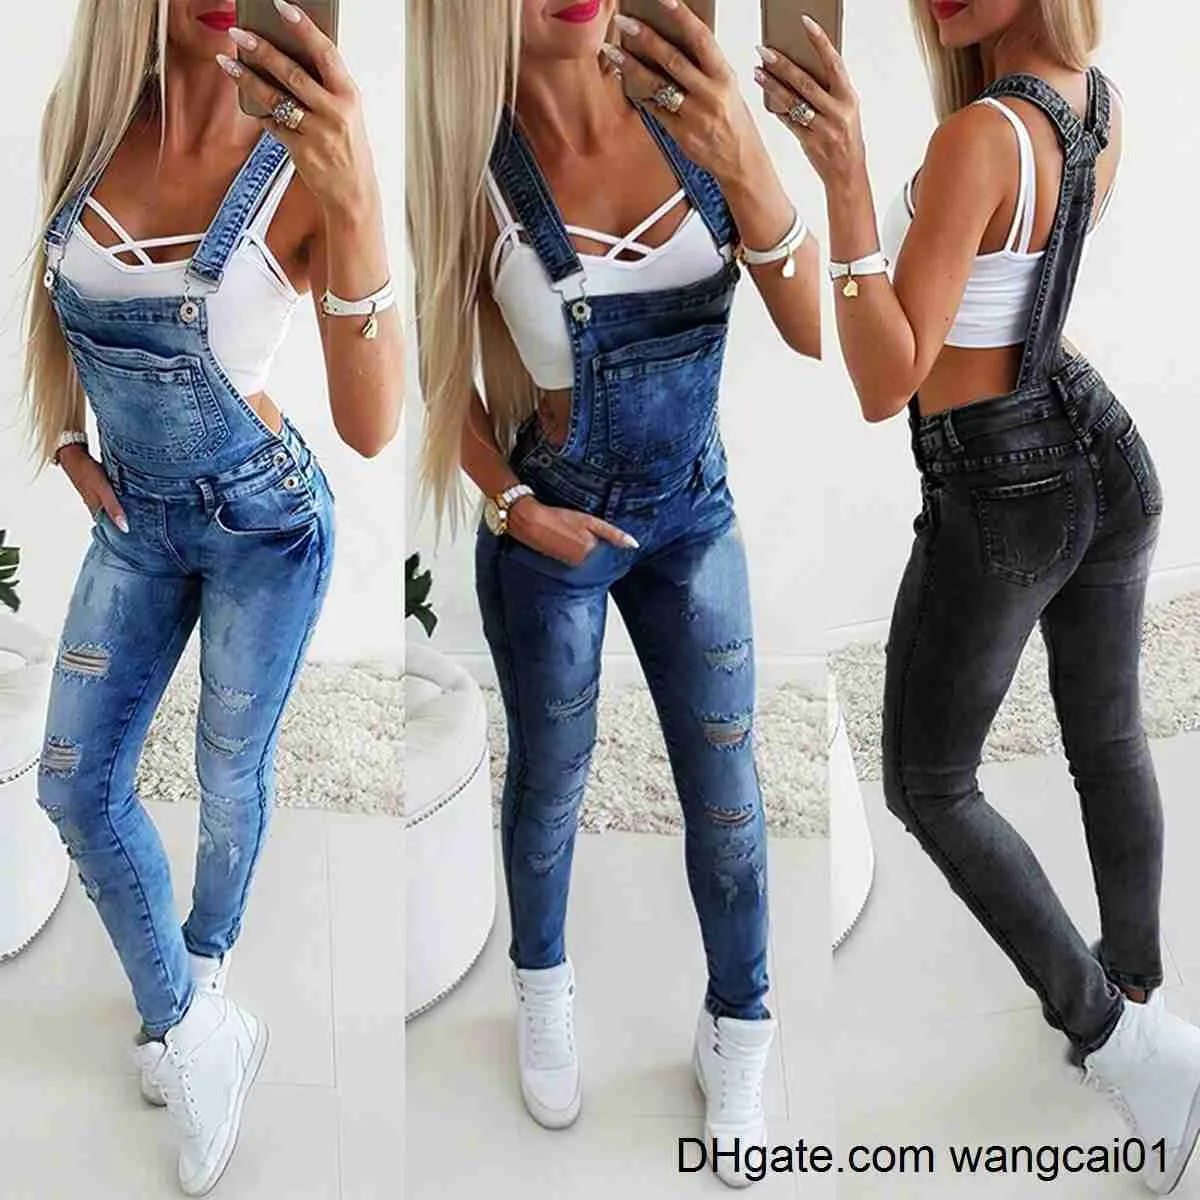 Women's Jumpsuits Rompers Women Pants Fashion Jeans Fa Street Overalls Loose Casual Ho Pants Lady Full ngth Trousers Hot 2020 410&3